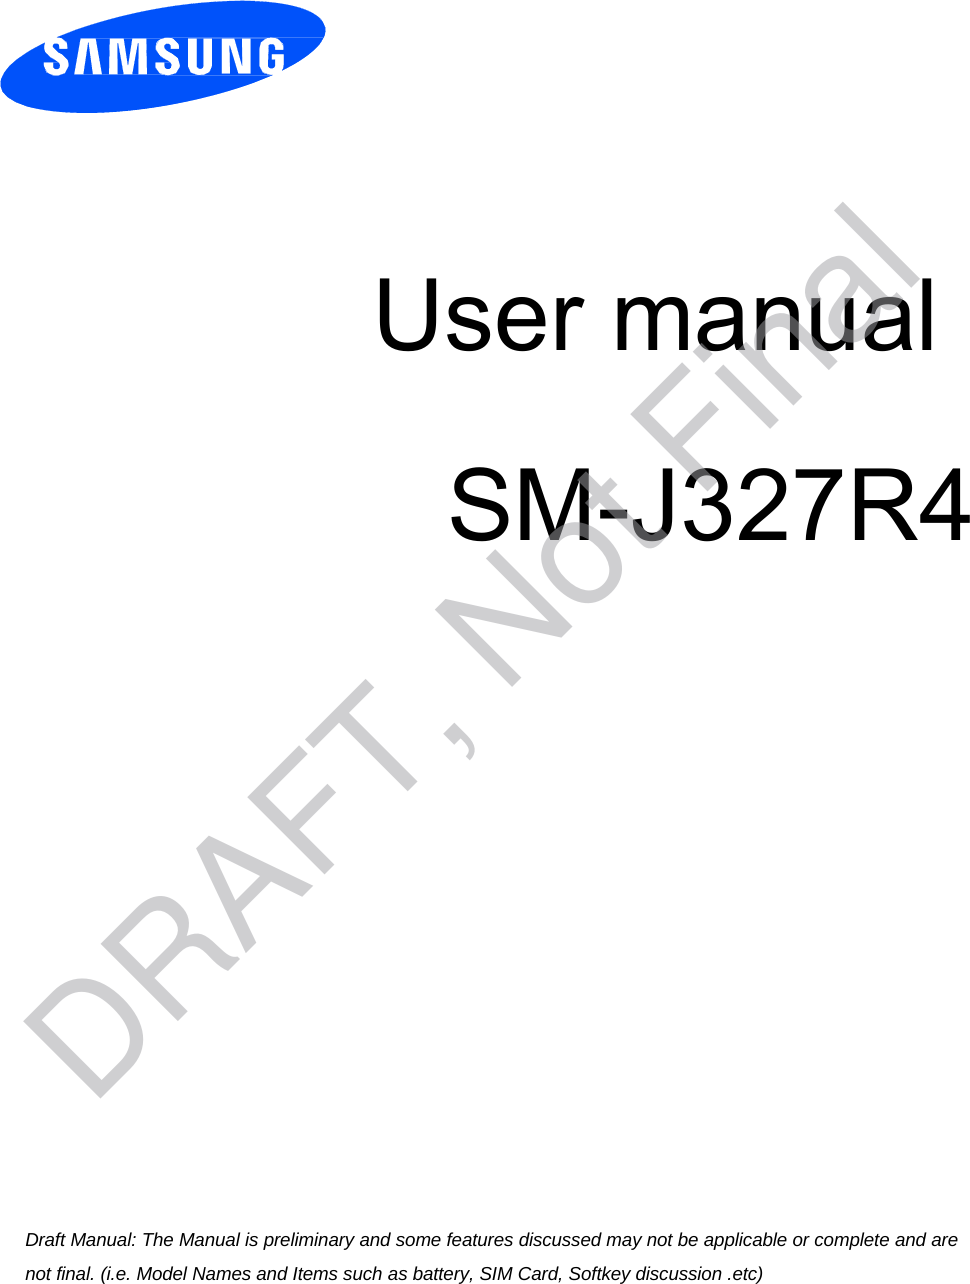 User manual SM-J327R4 Draft Manual: The Manual is preliminary and some features discussed may not be applicable or complete and are not final. (i.e. Model Names and Items such as battery, SIM Card, Softkey discussion .etc) DRAFT, Not Final